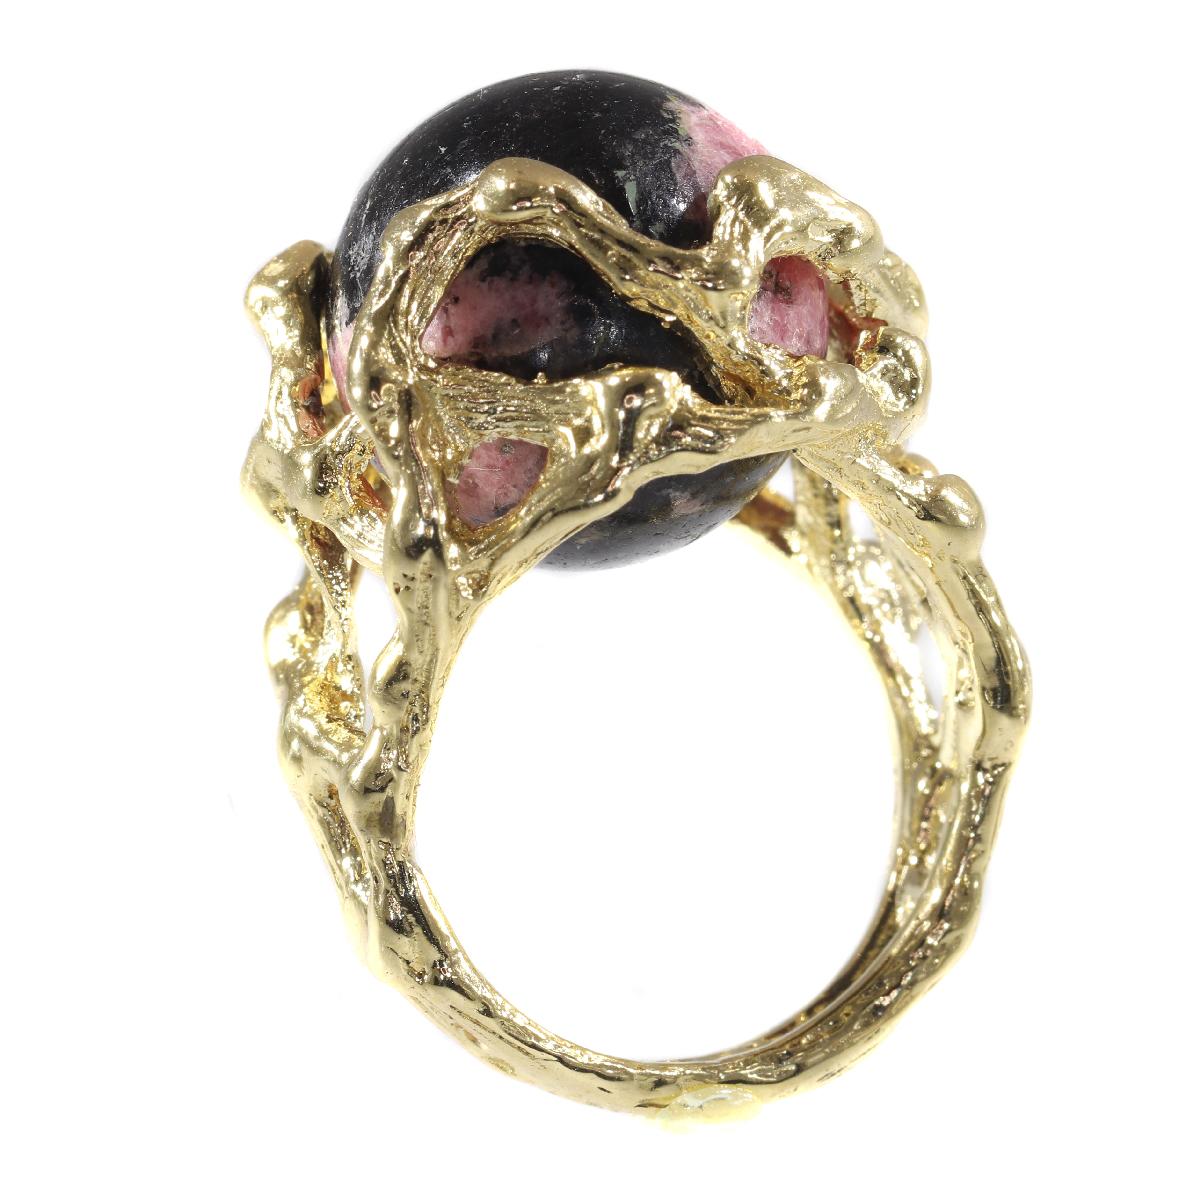 Vintage 1960s Gold Art Ring with Interchangeable Precious Stones Spheres For Sale 4